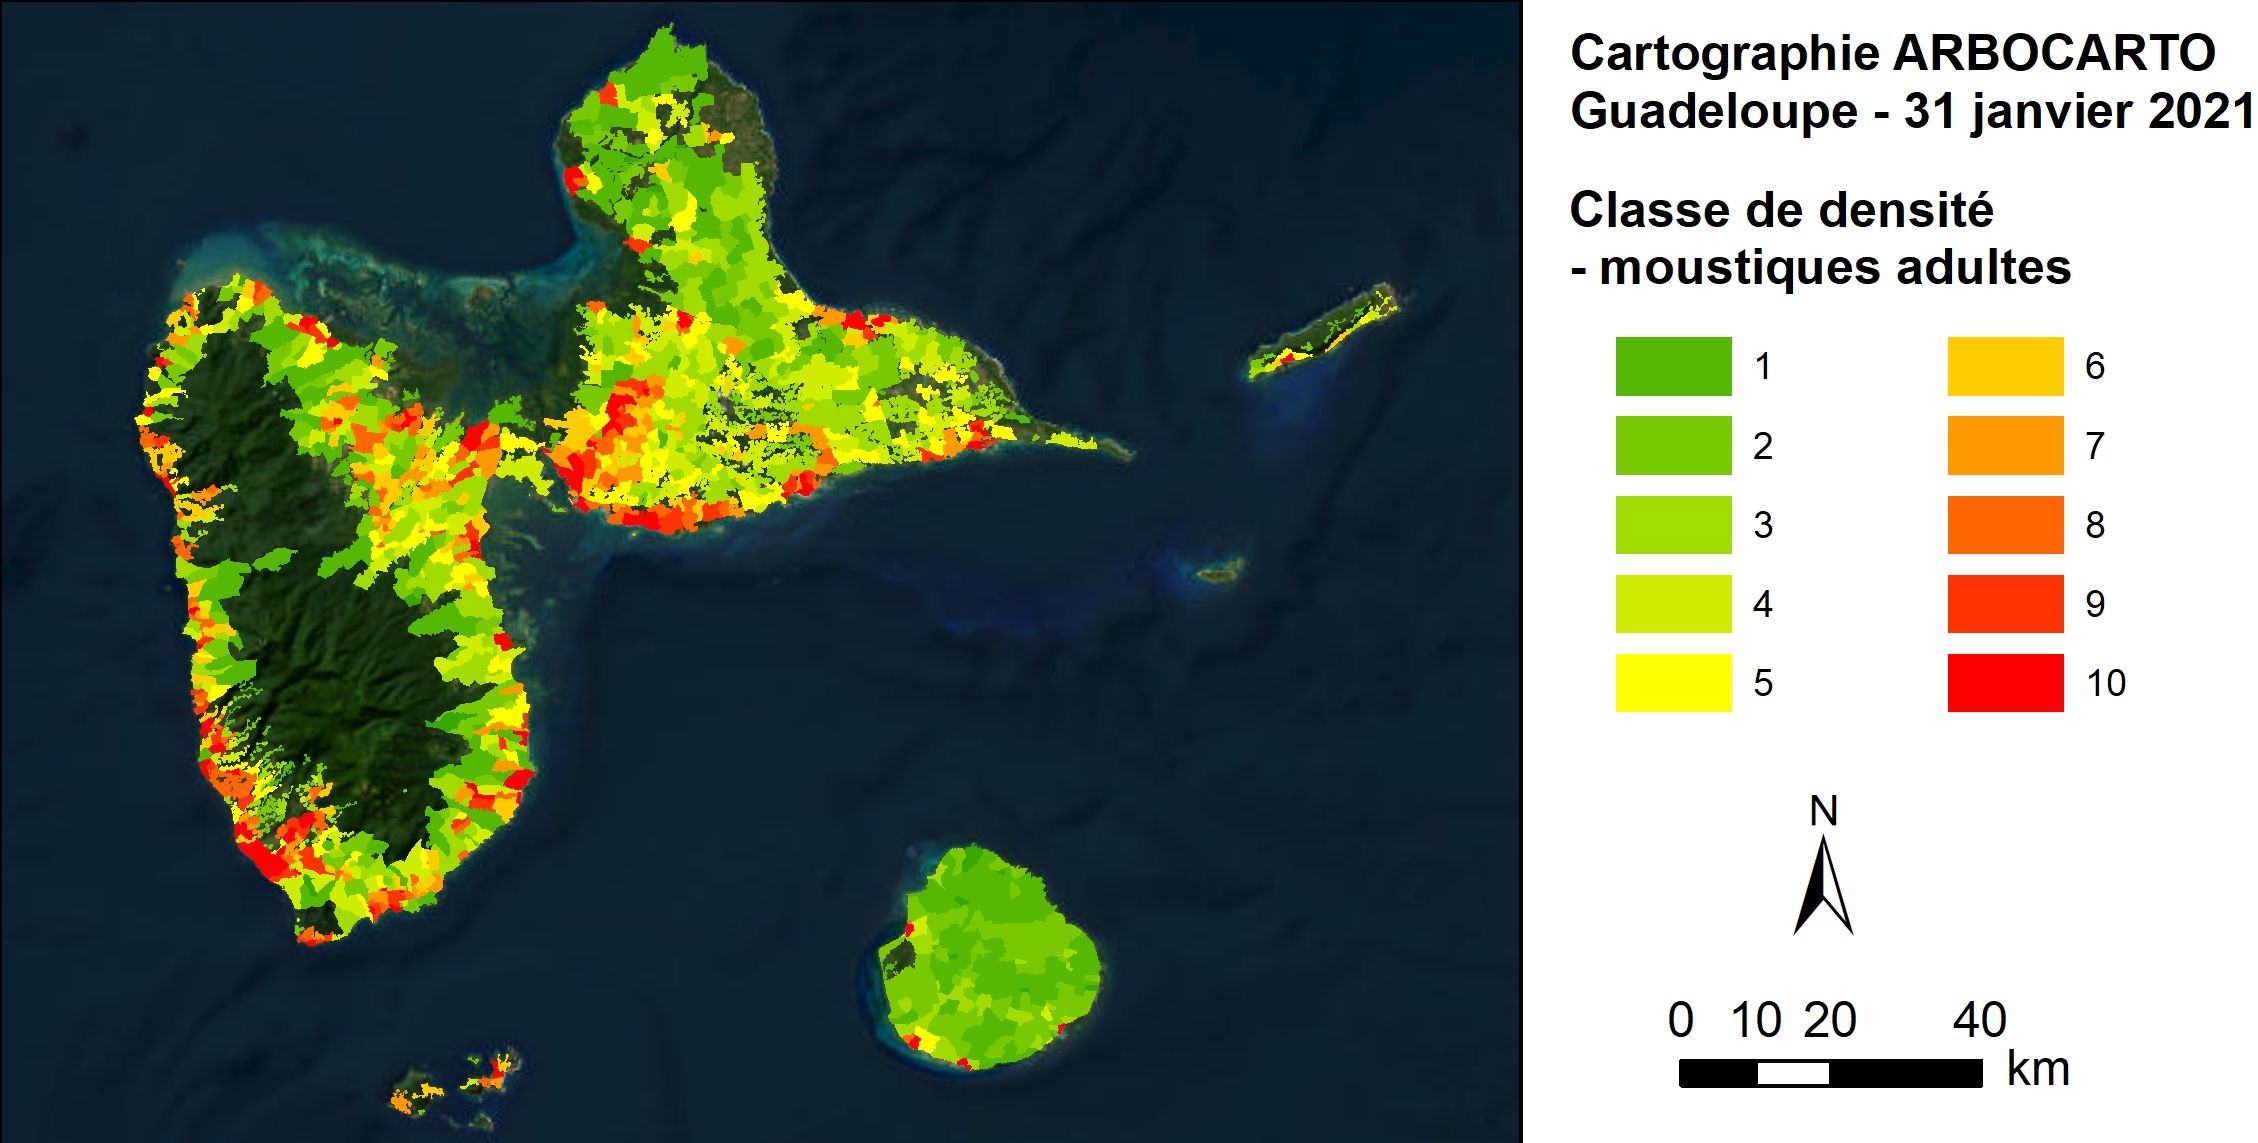 Example of output from the ARBOCARTO tool. Simulation of adult Aedes albopictus mosquito densities, Guadeloupe site, January 2021. From green, low density areas, to red, high density areas.